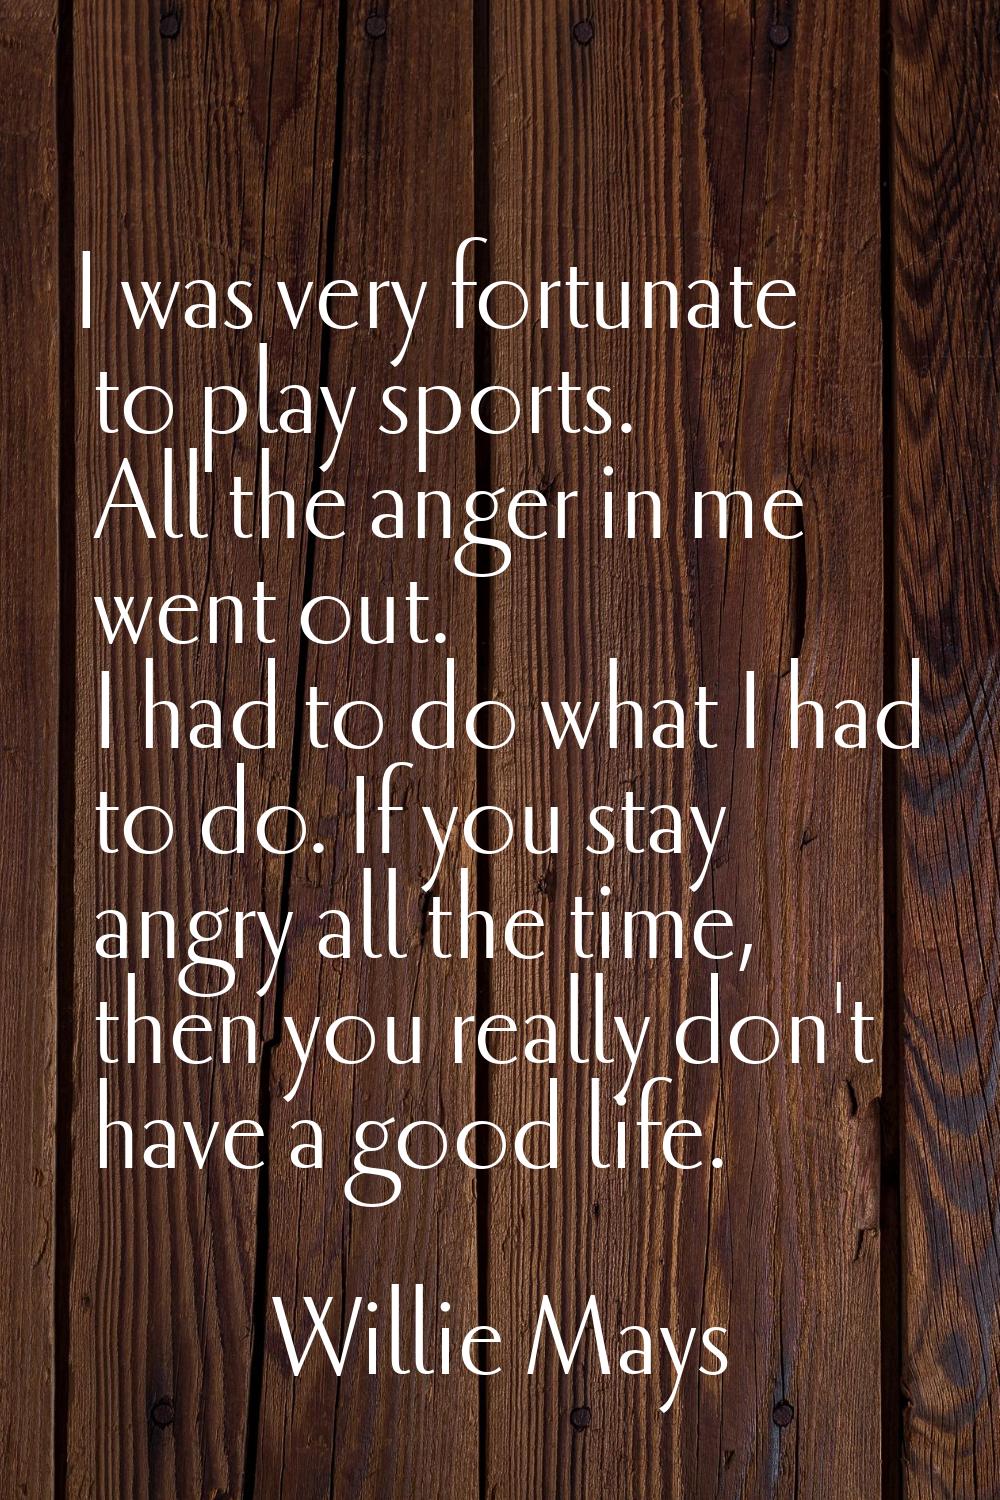 I was very fortunate to play sports. All the anger in me went out. I had to do what I had to do. If